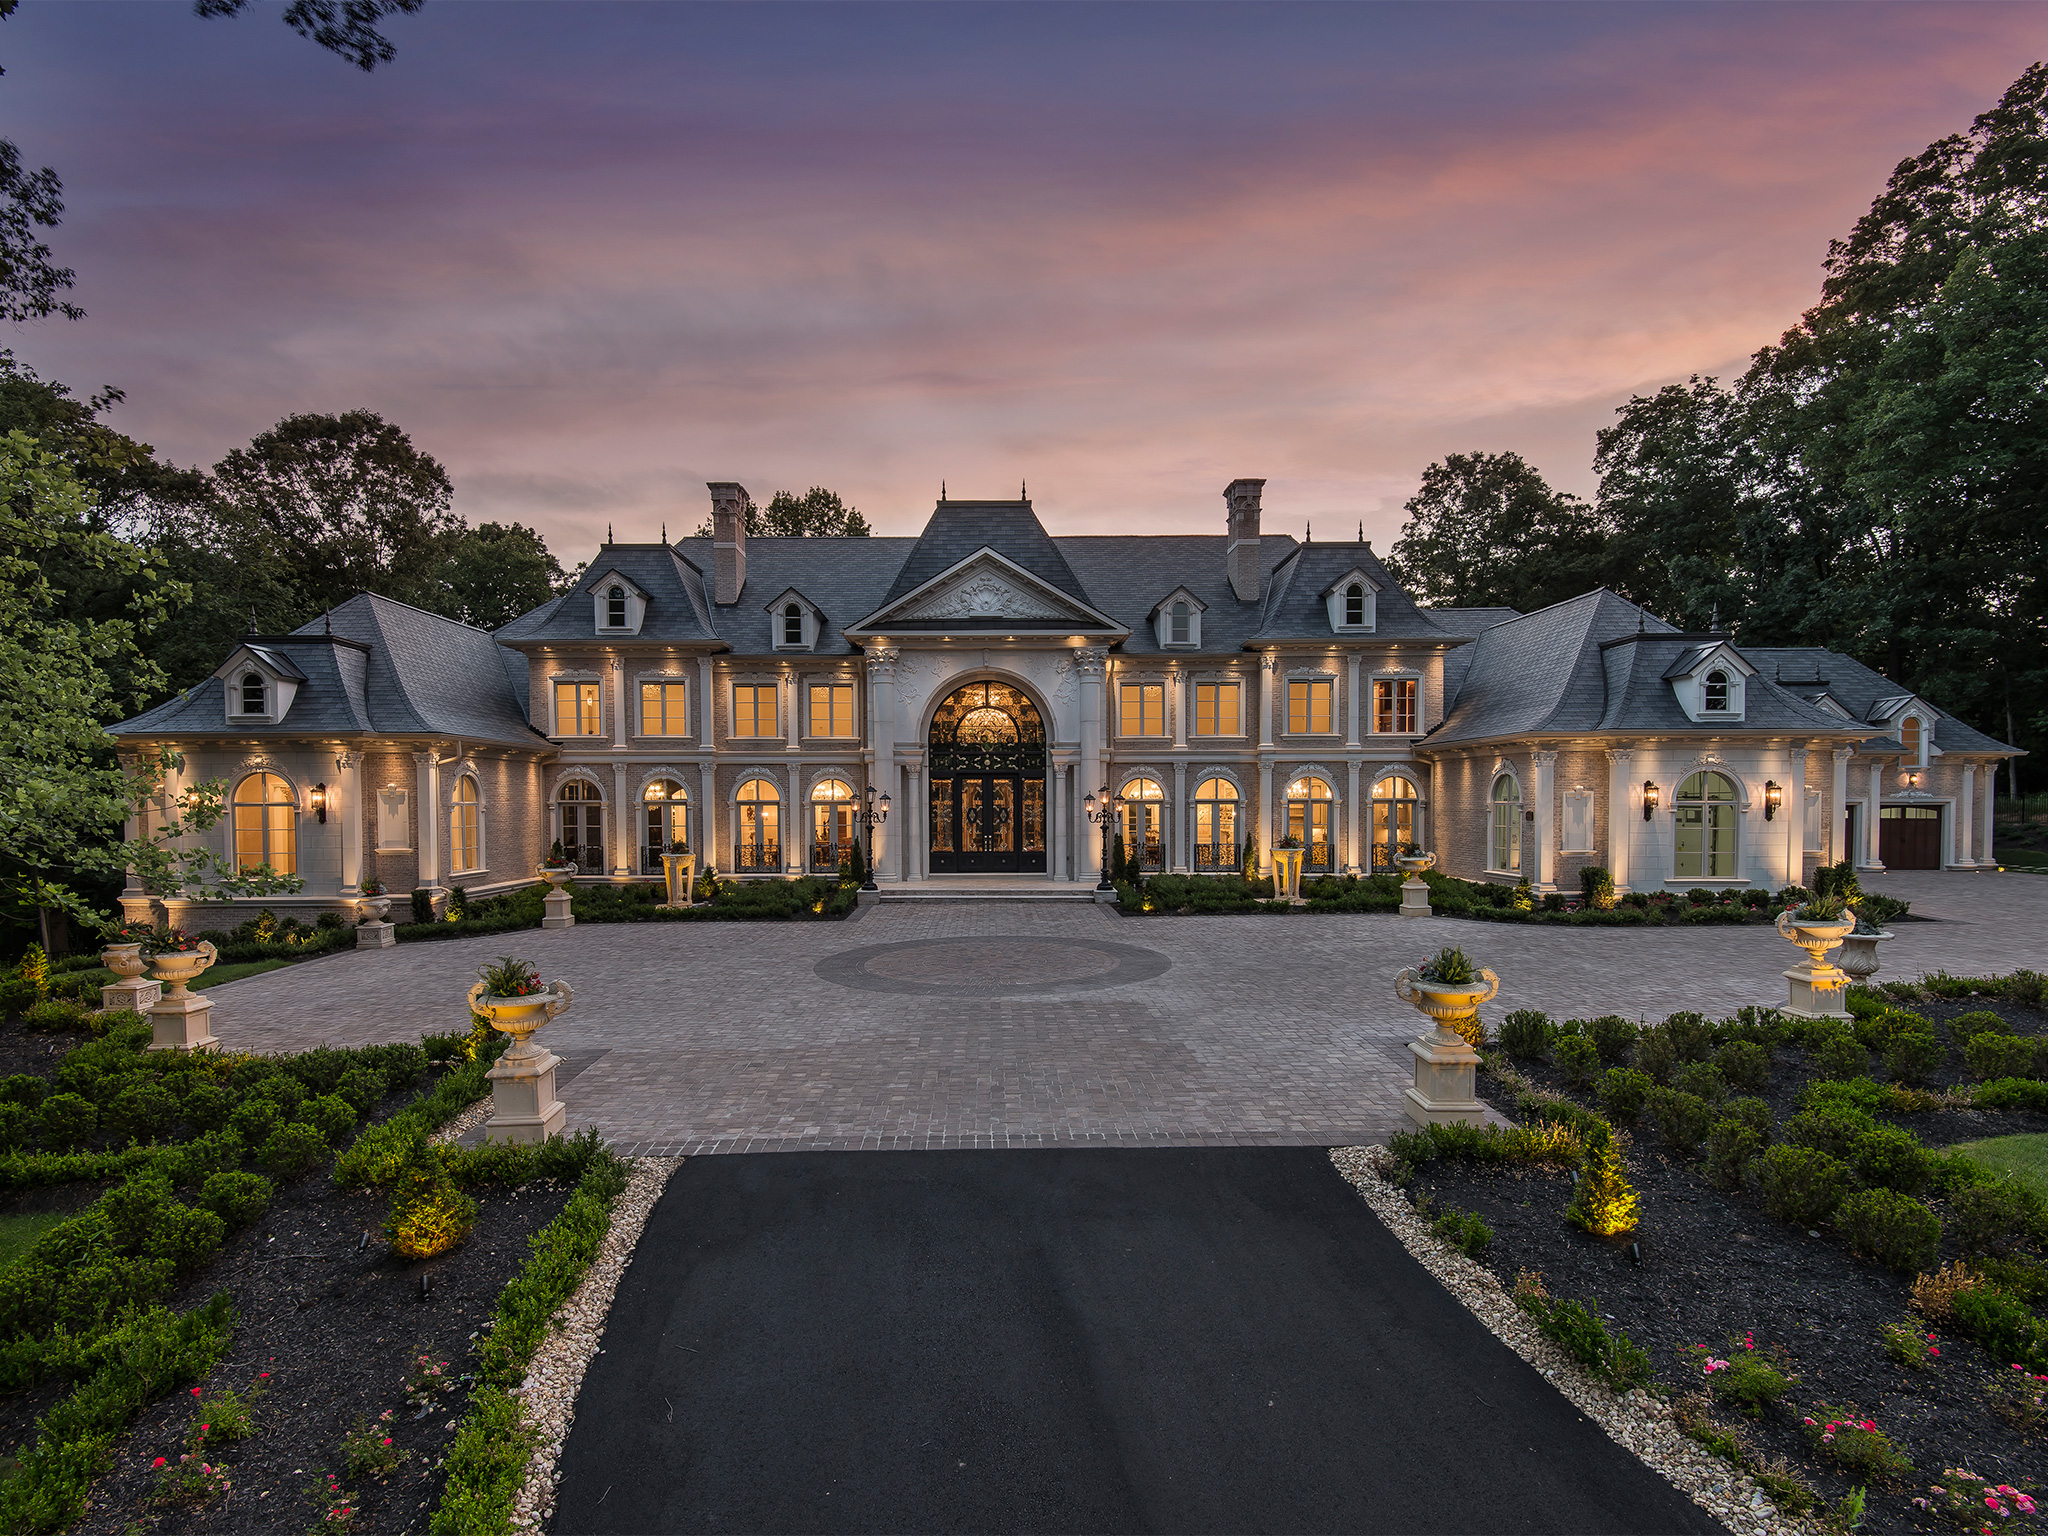 Luxury Home Magazine of Washington, DC Features a Magnificent Mansion